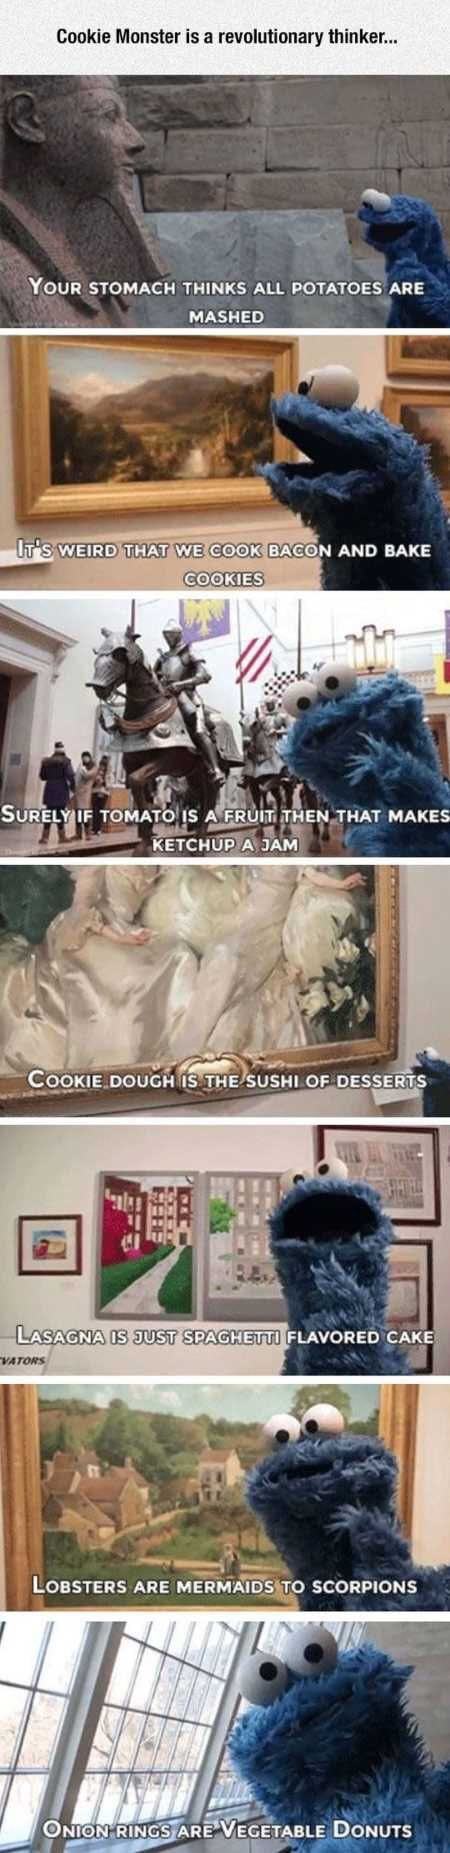 Obrázek cookie monster is right